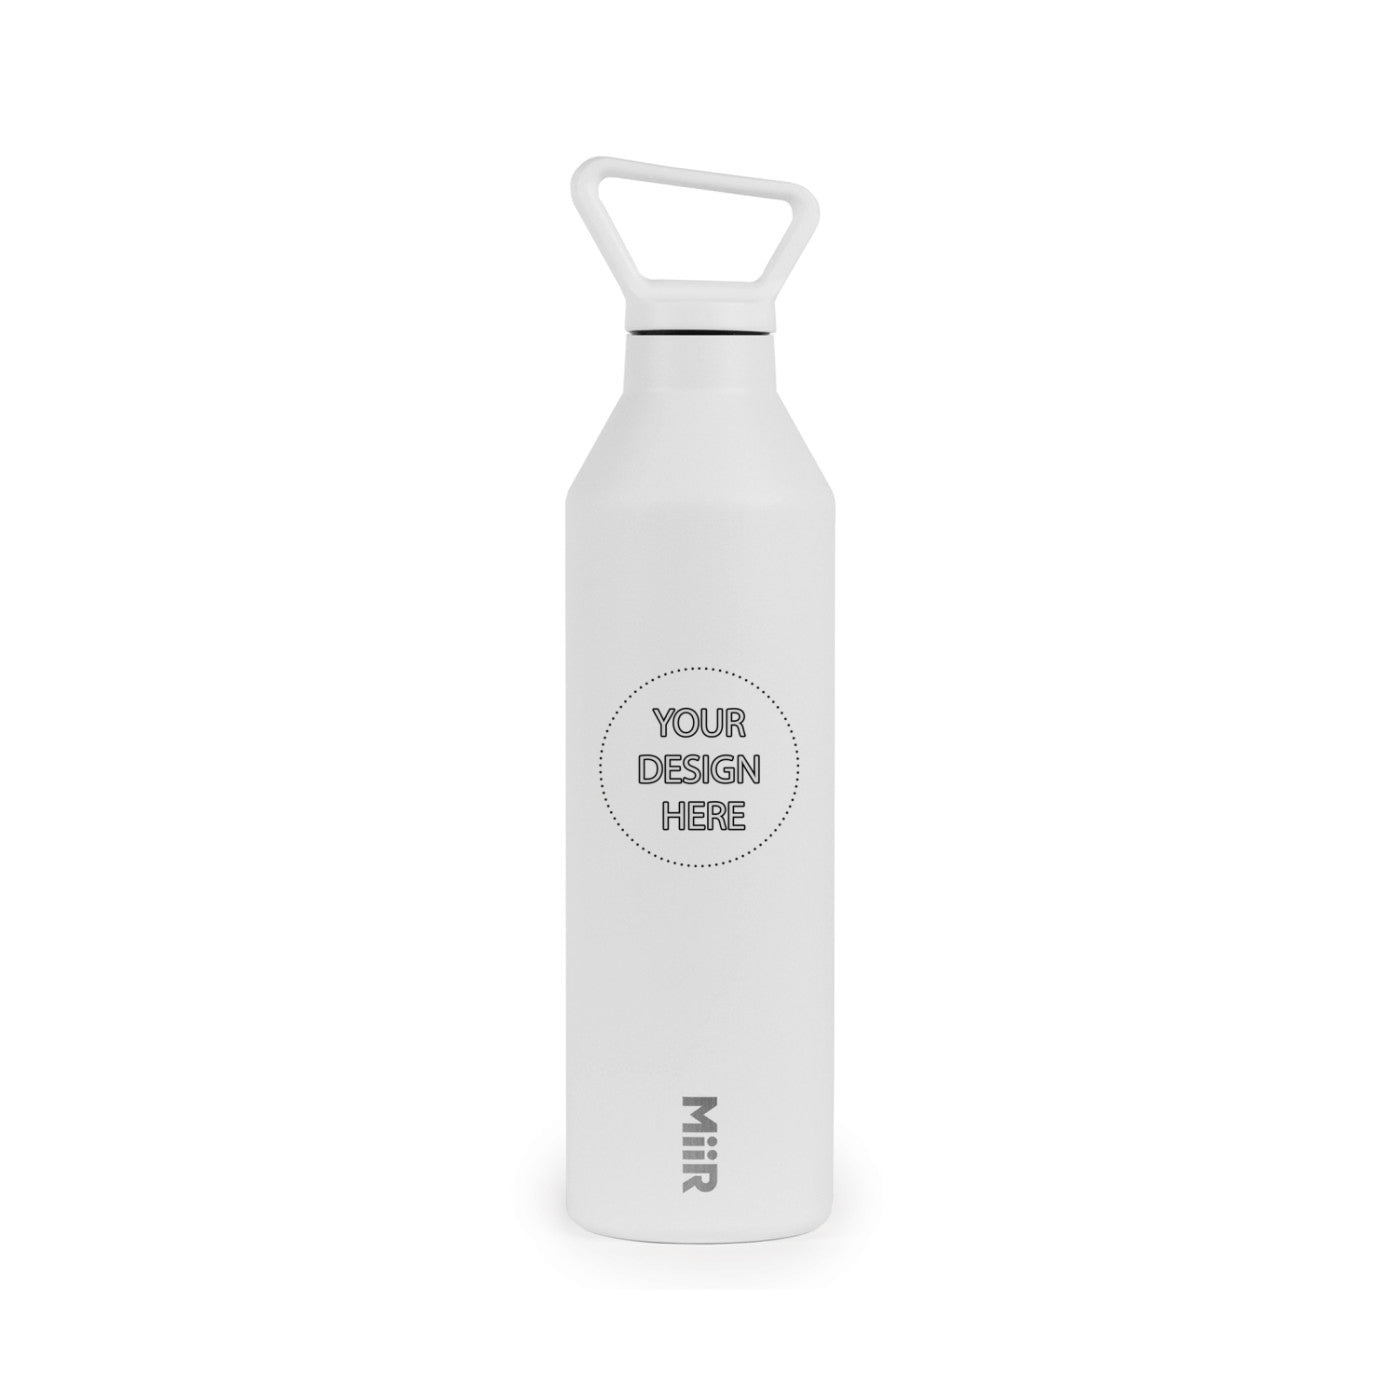 Customizable Miir 23 oz insulated water bottle in white with logo.